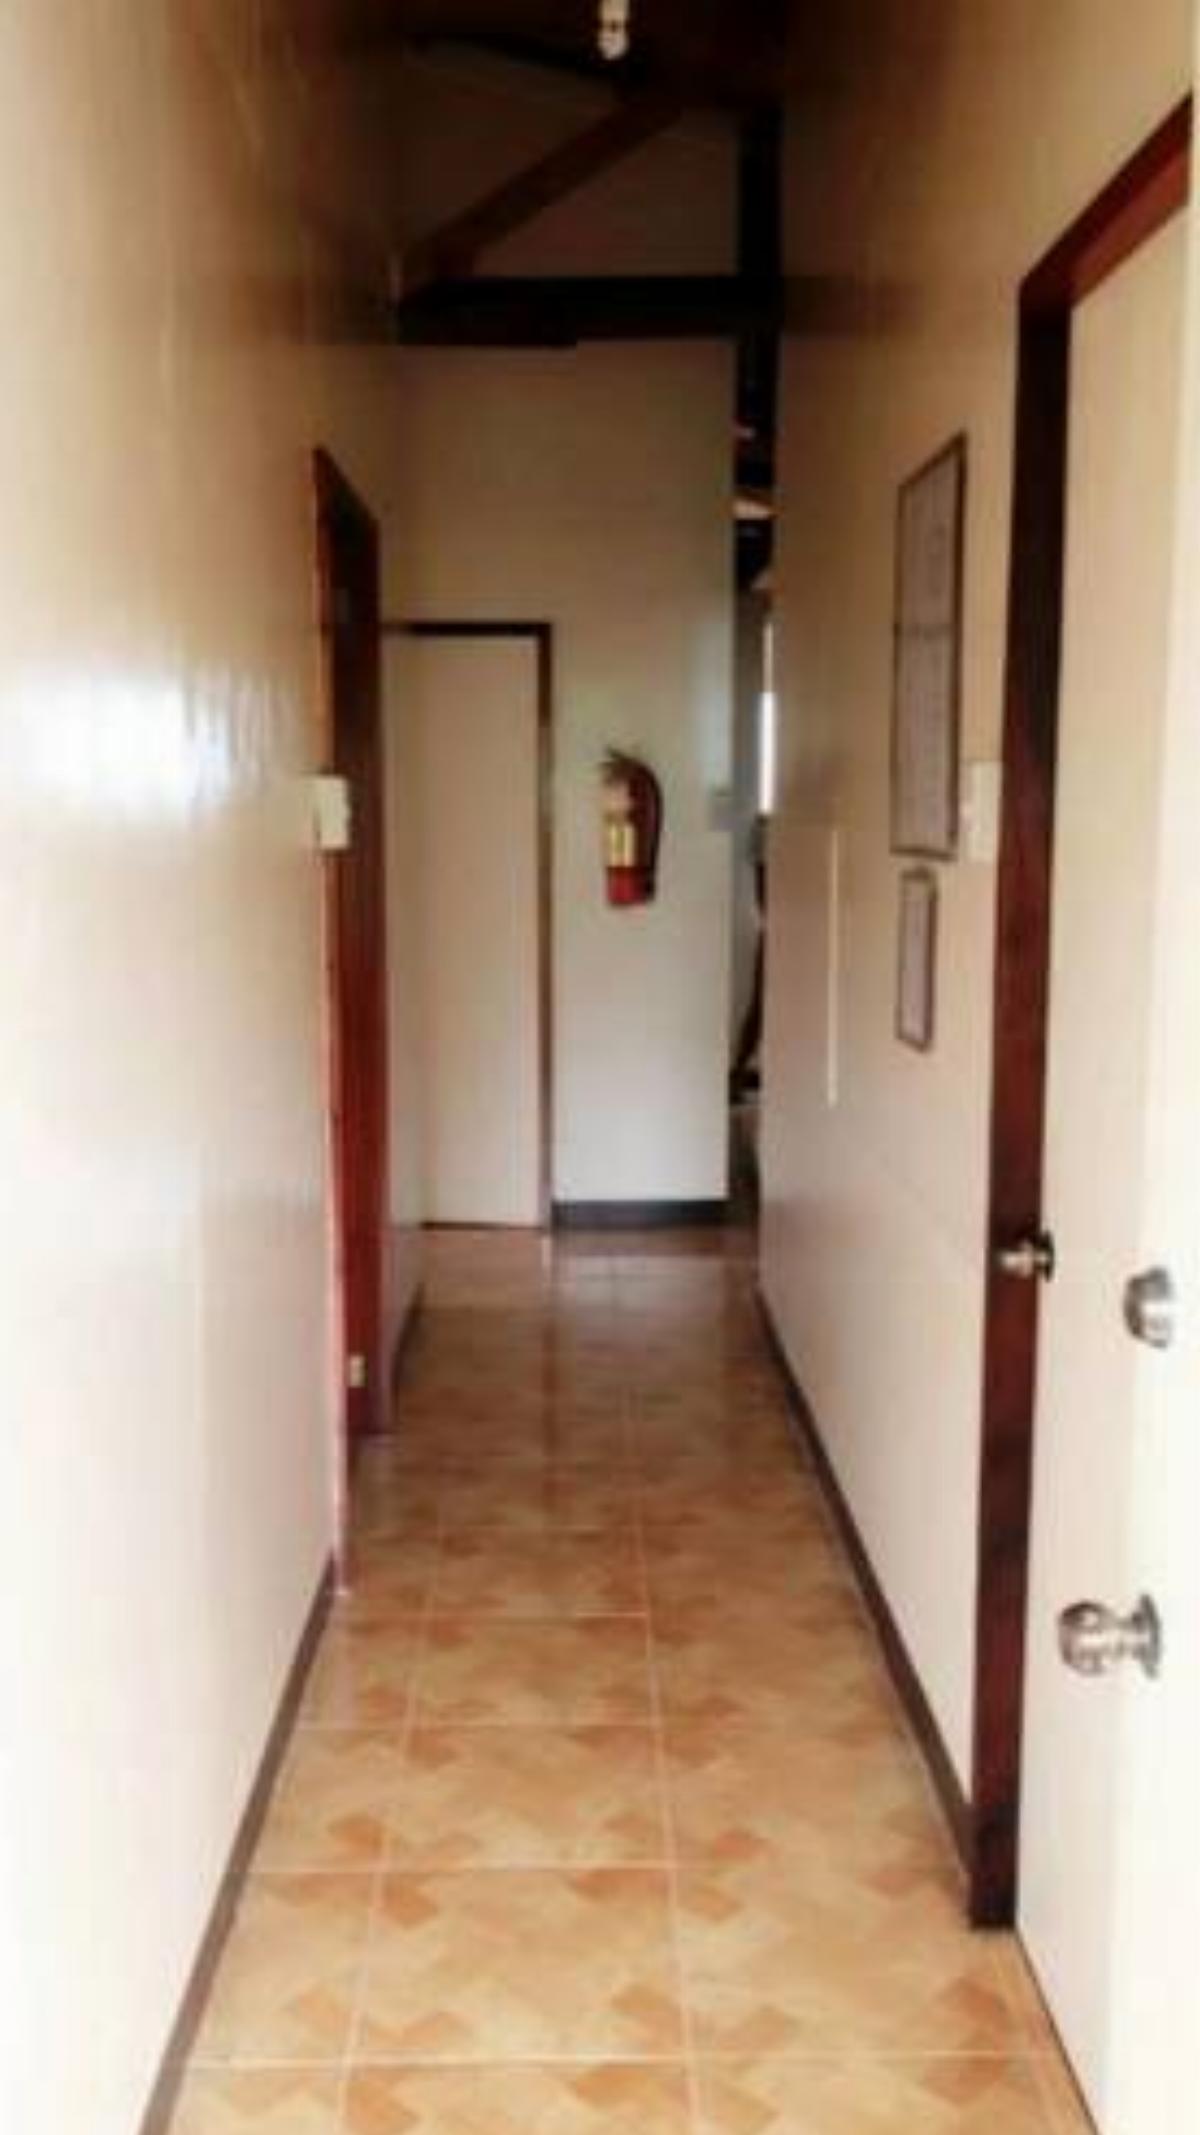 RB Transient House Hotel Coron Philippines